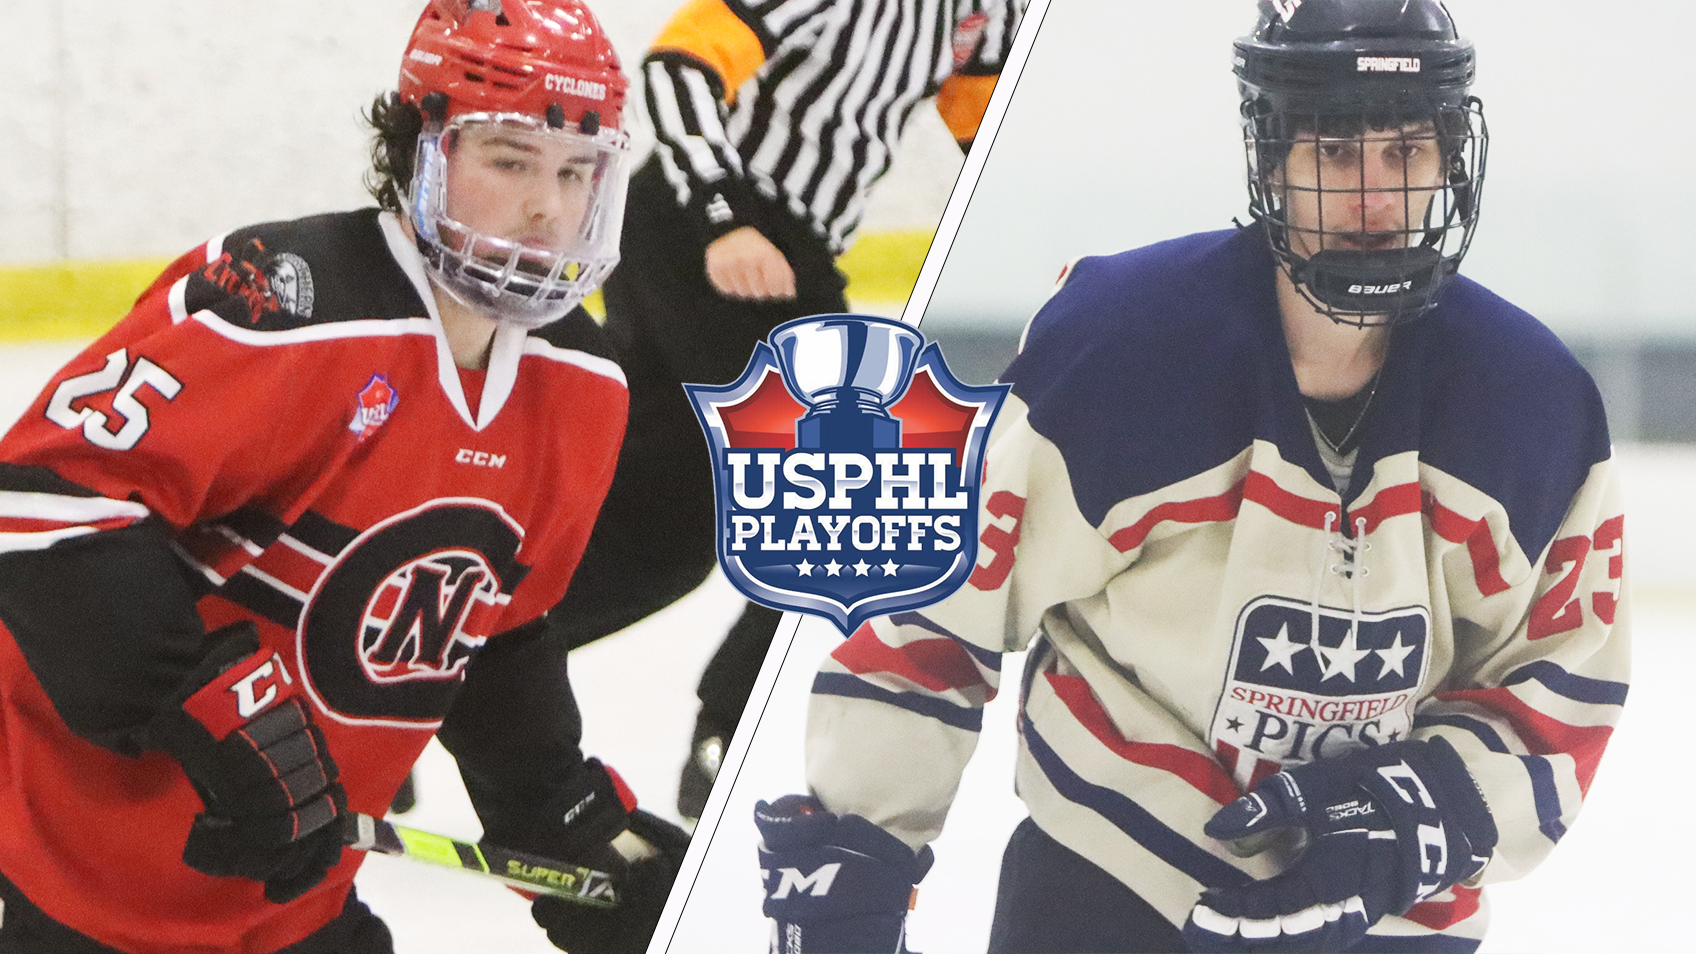 #USPHLPlayoffs Series Preview: Northern Cyclones vs. Springfield Pics